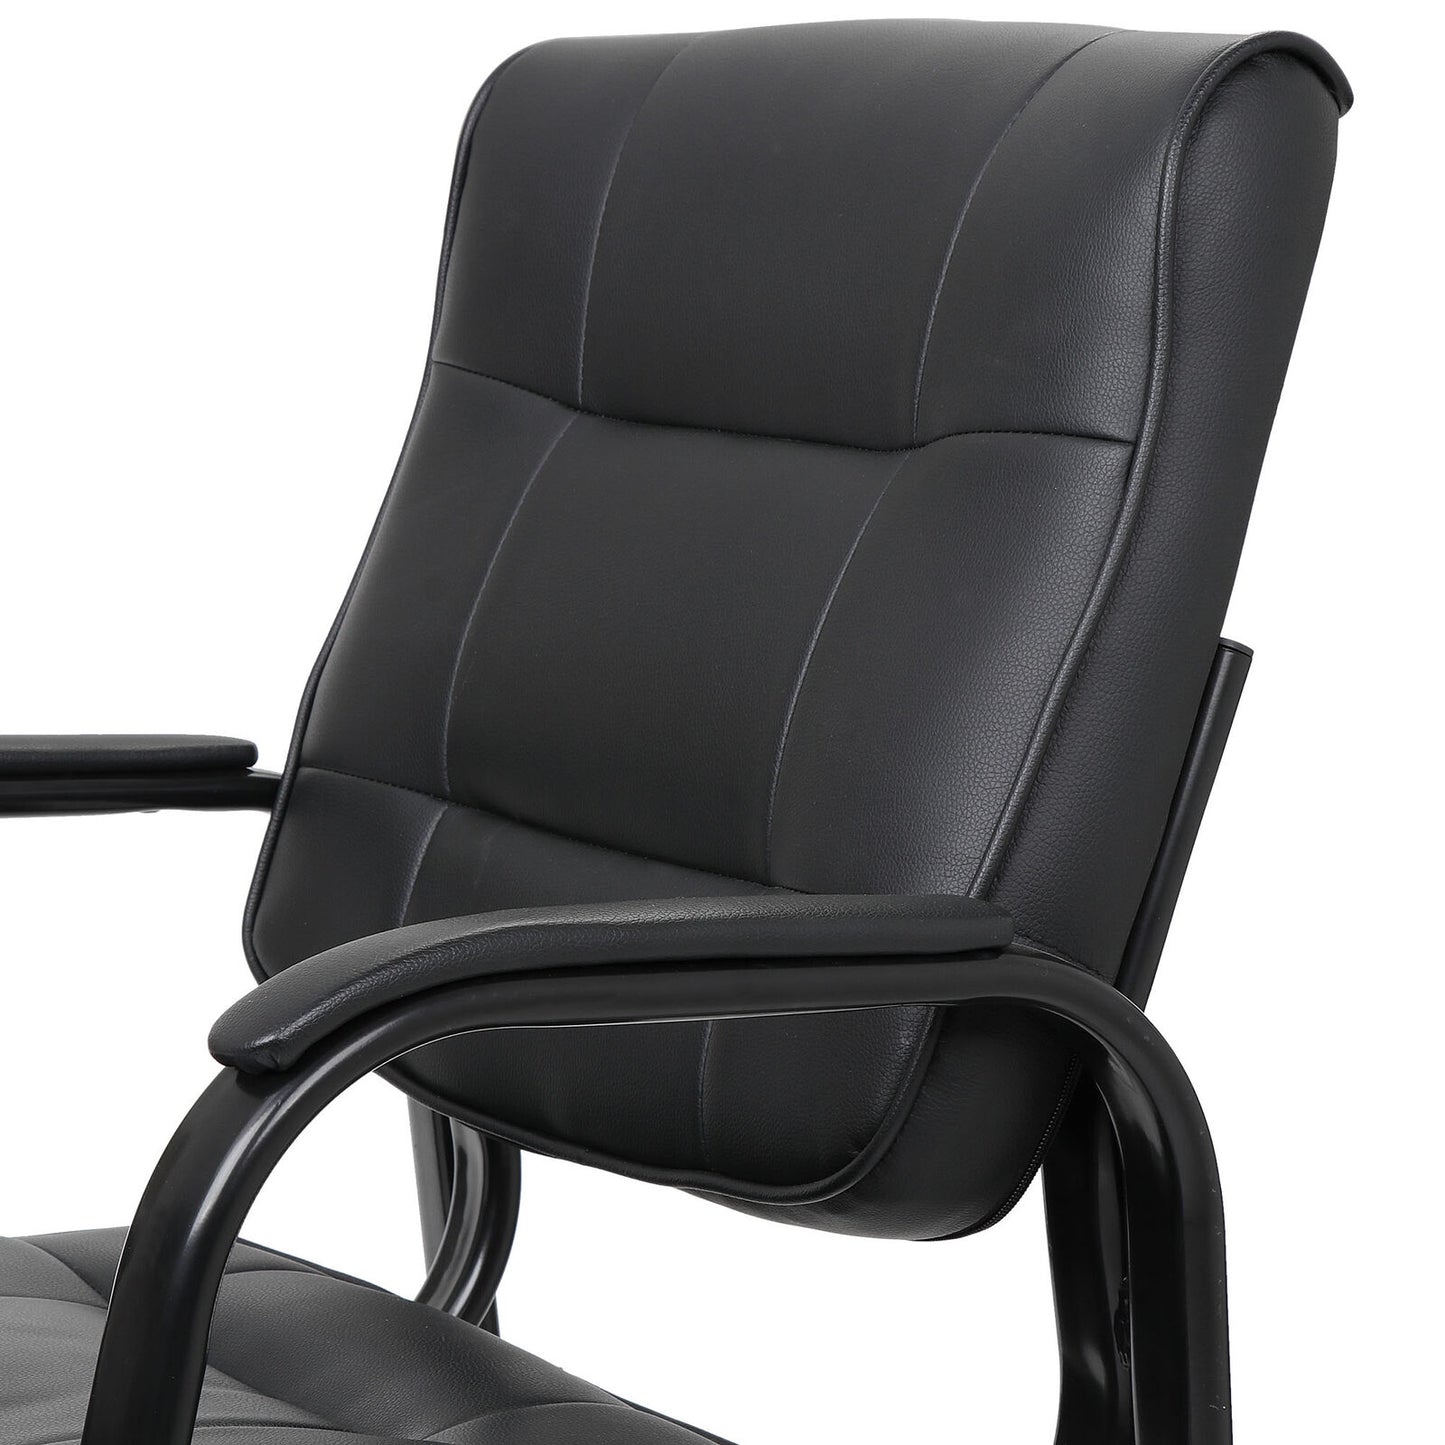 Leather Guest Chair Black Waiting Room Office Desk Side Chairs Reception